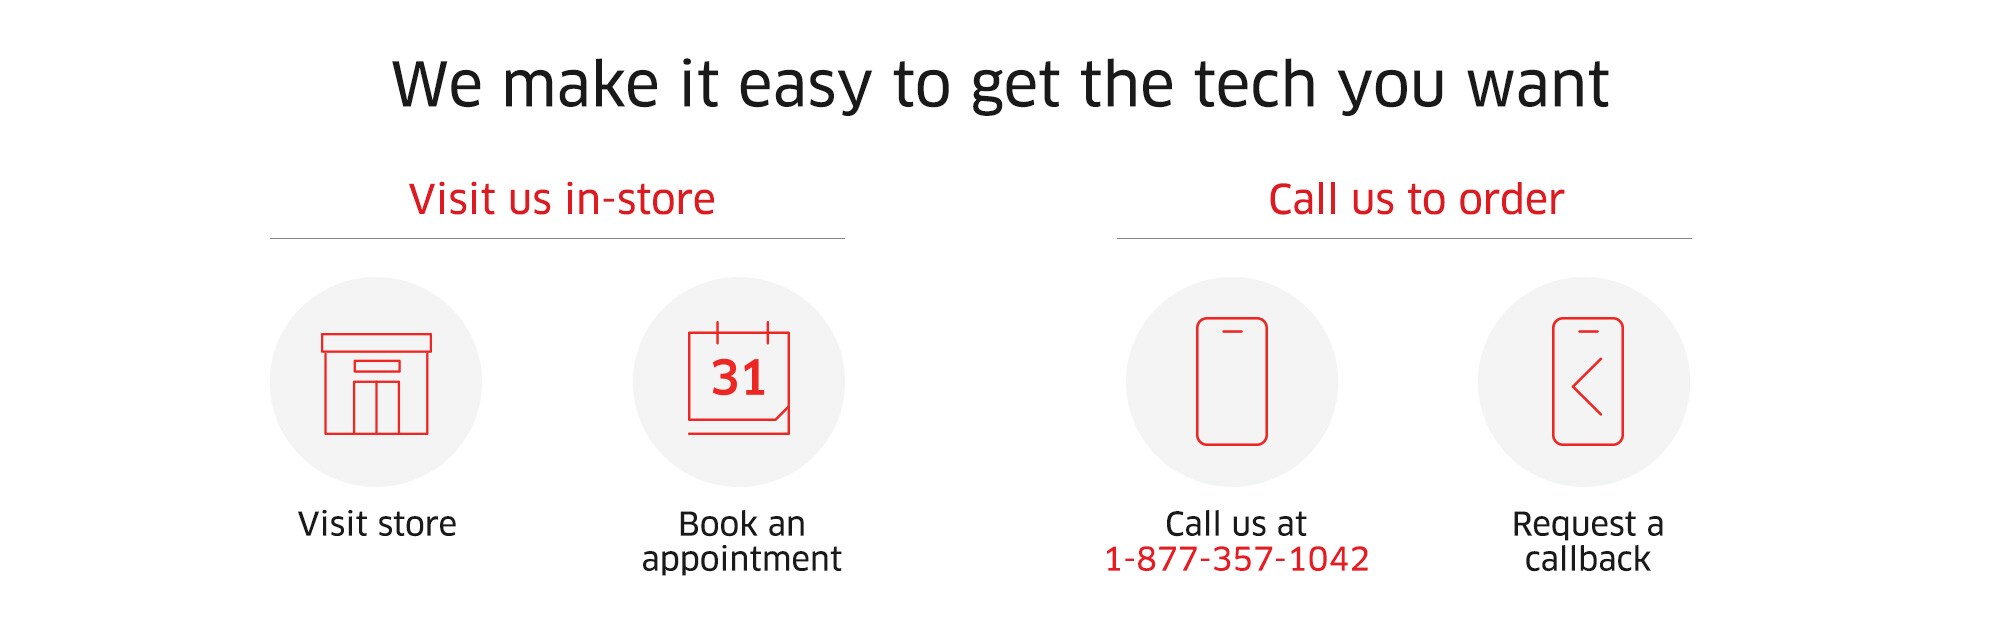 We make it easy to get the tech you want